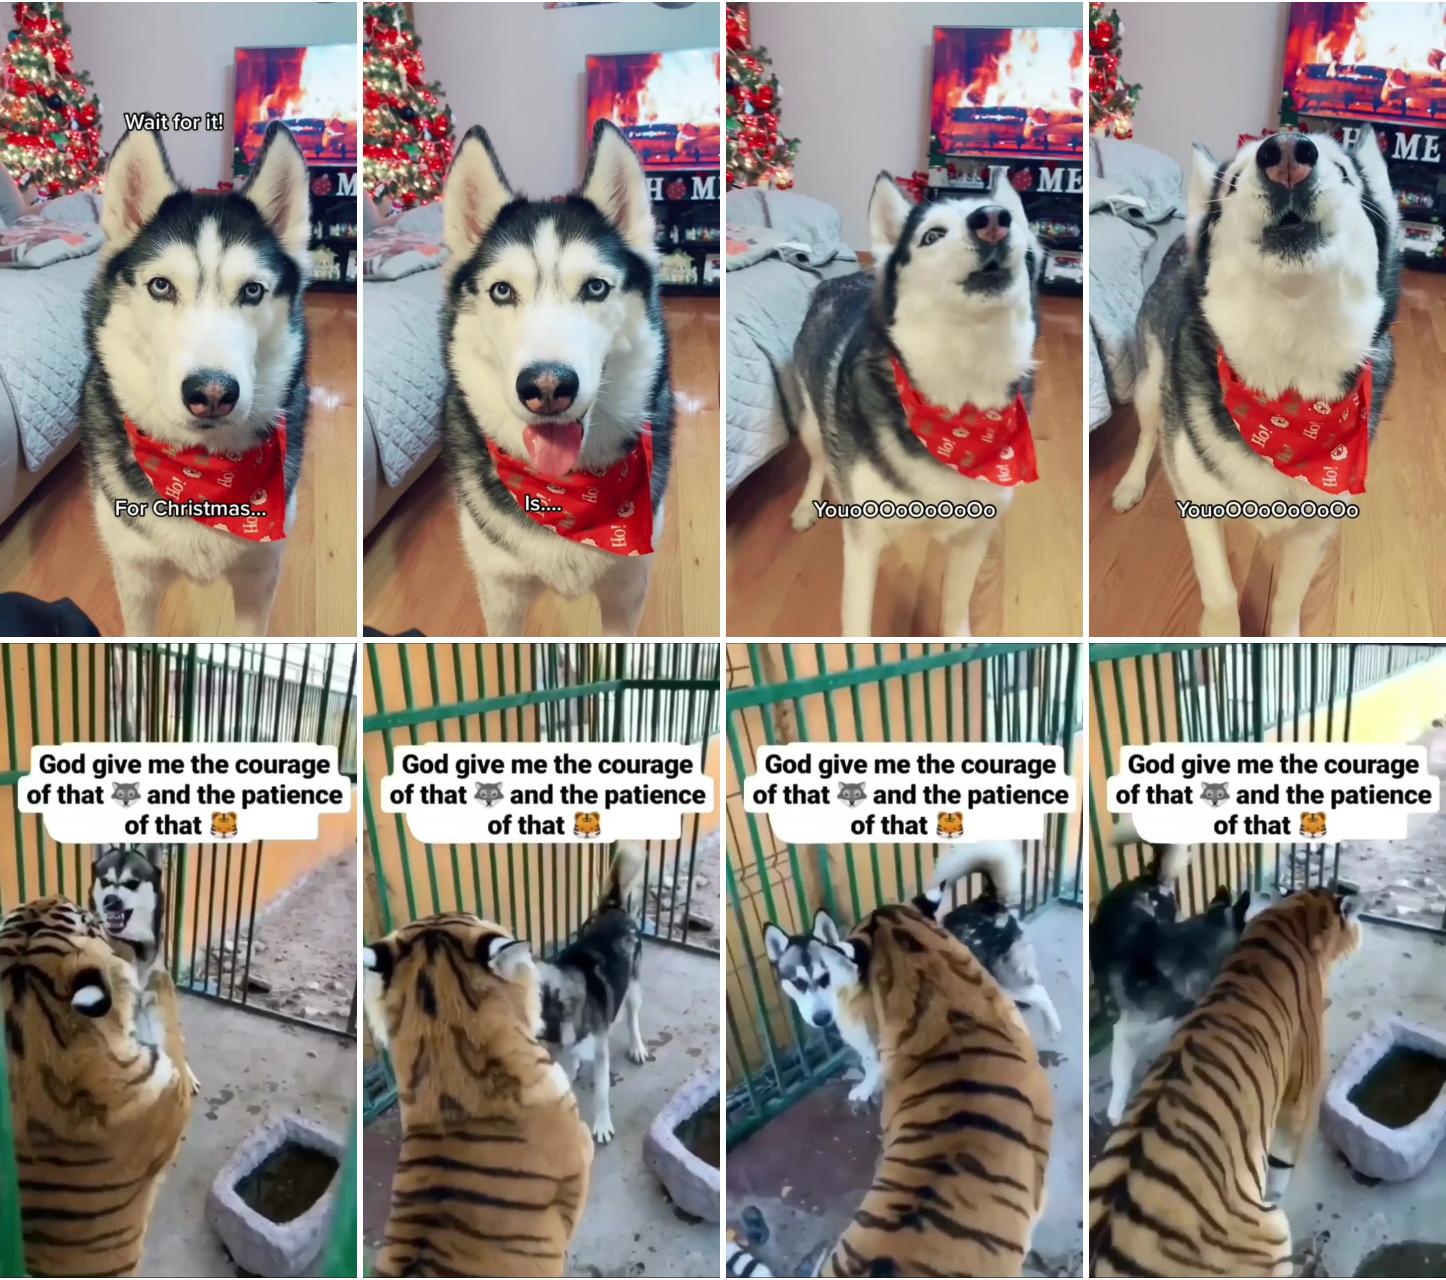 Husky vs tiger. the tiger is respect the baby husky; really cute puppies